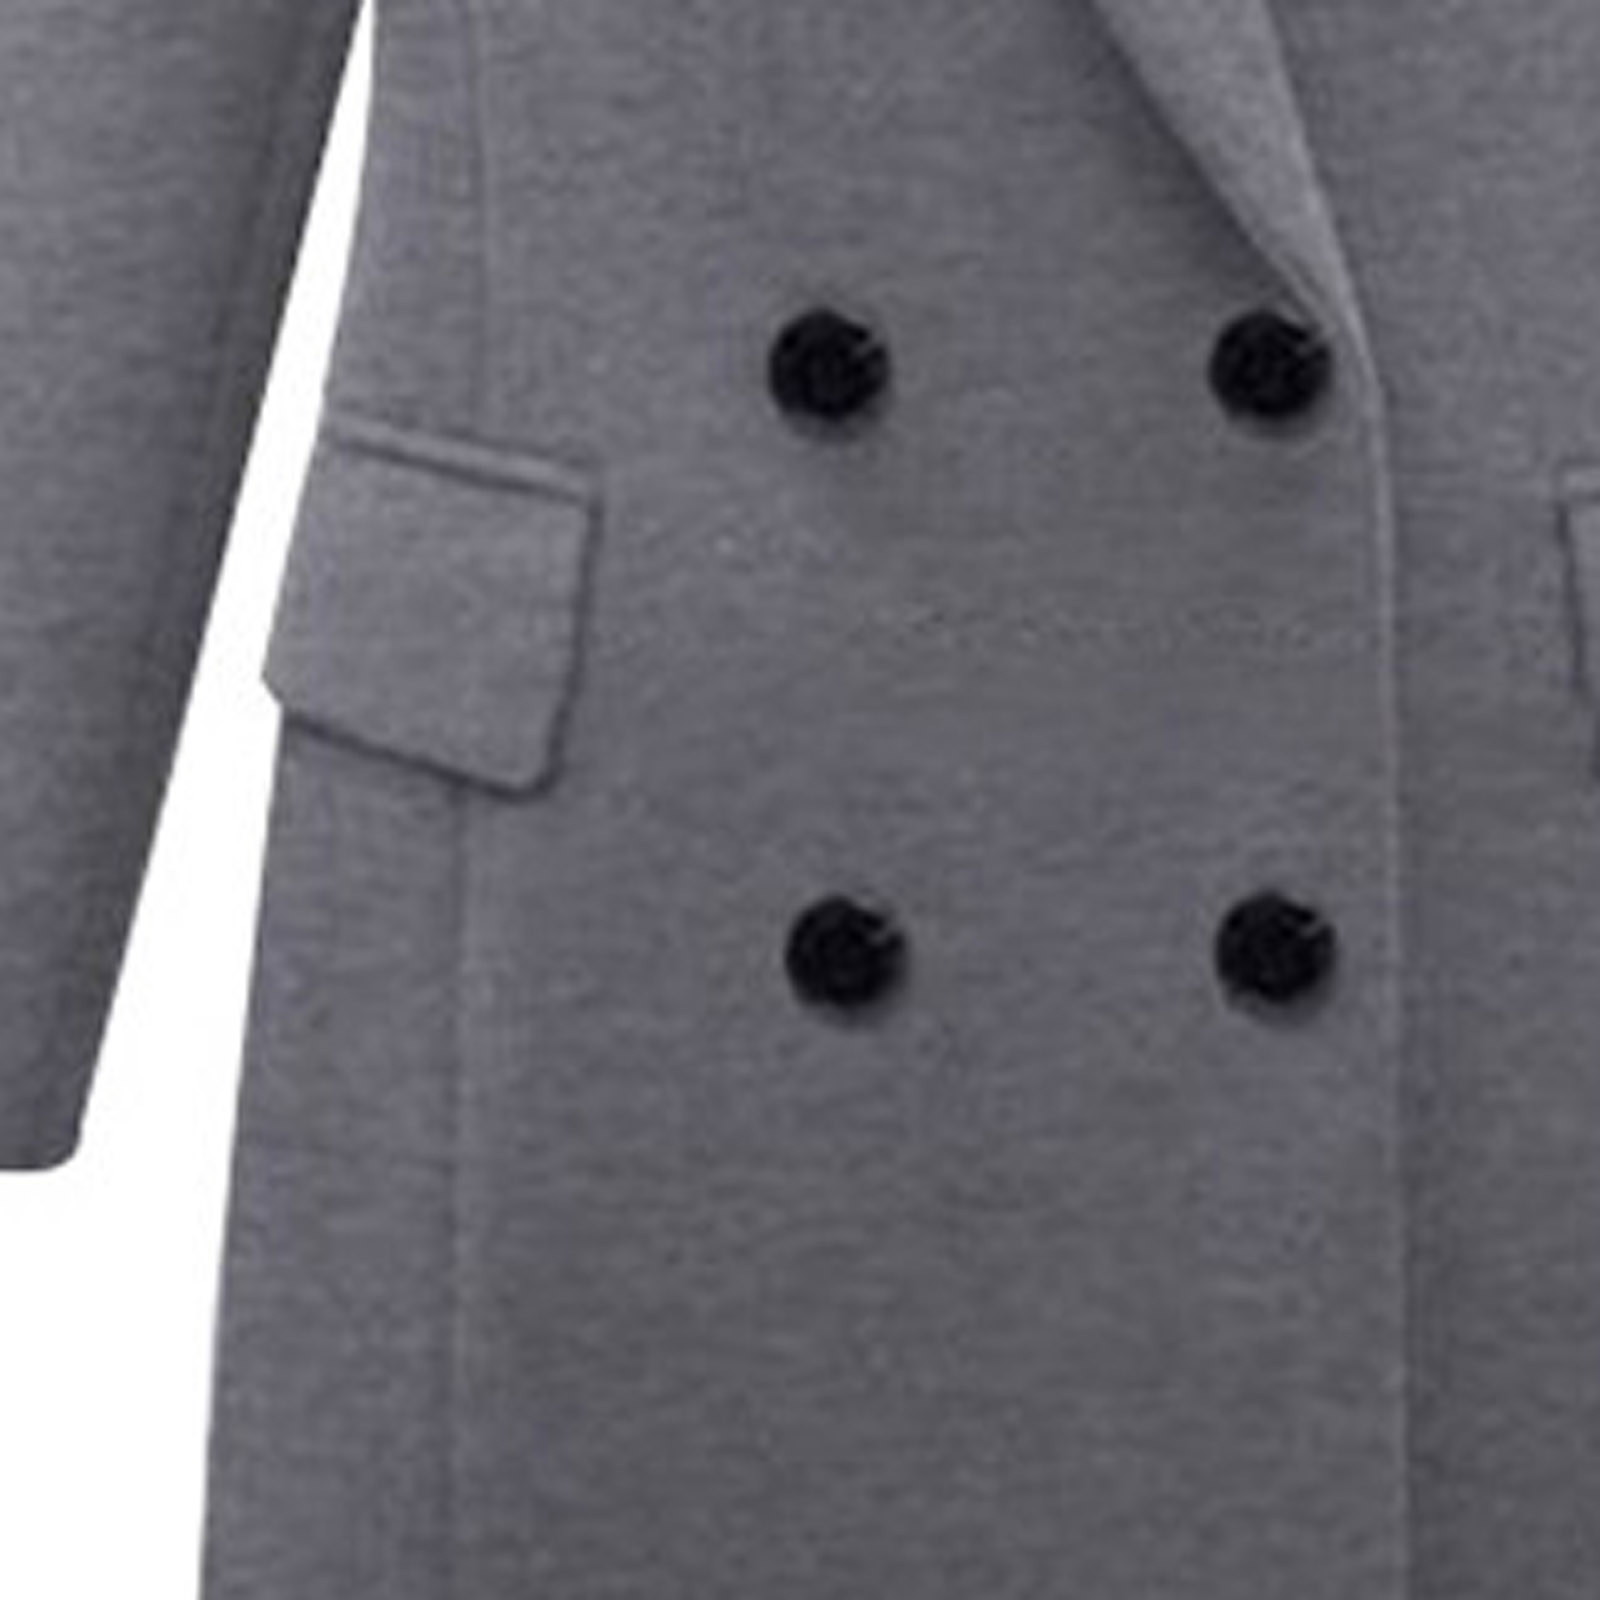 Women Winter Warm Wool Blend Mid-Long Pea Coat Basic Designed Notch Double-Breasted Lapel Jacket Outwear for Women Womens Clothes - image 5 of 5